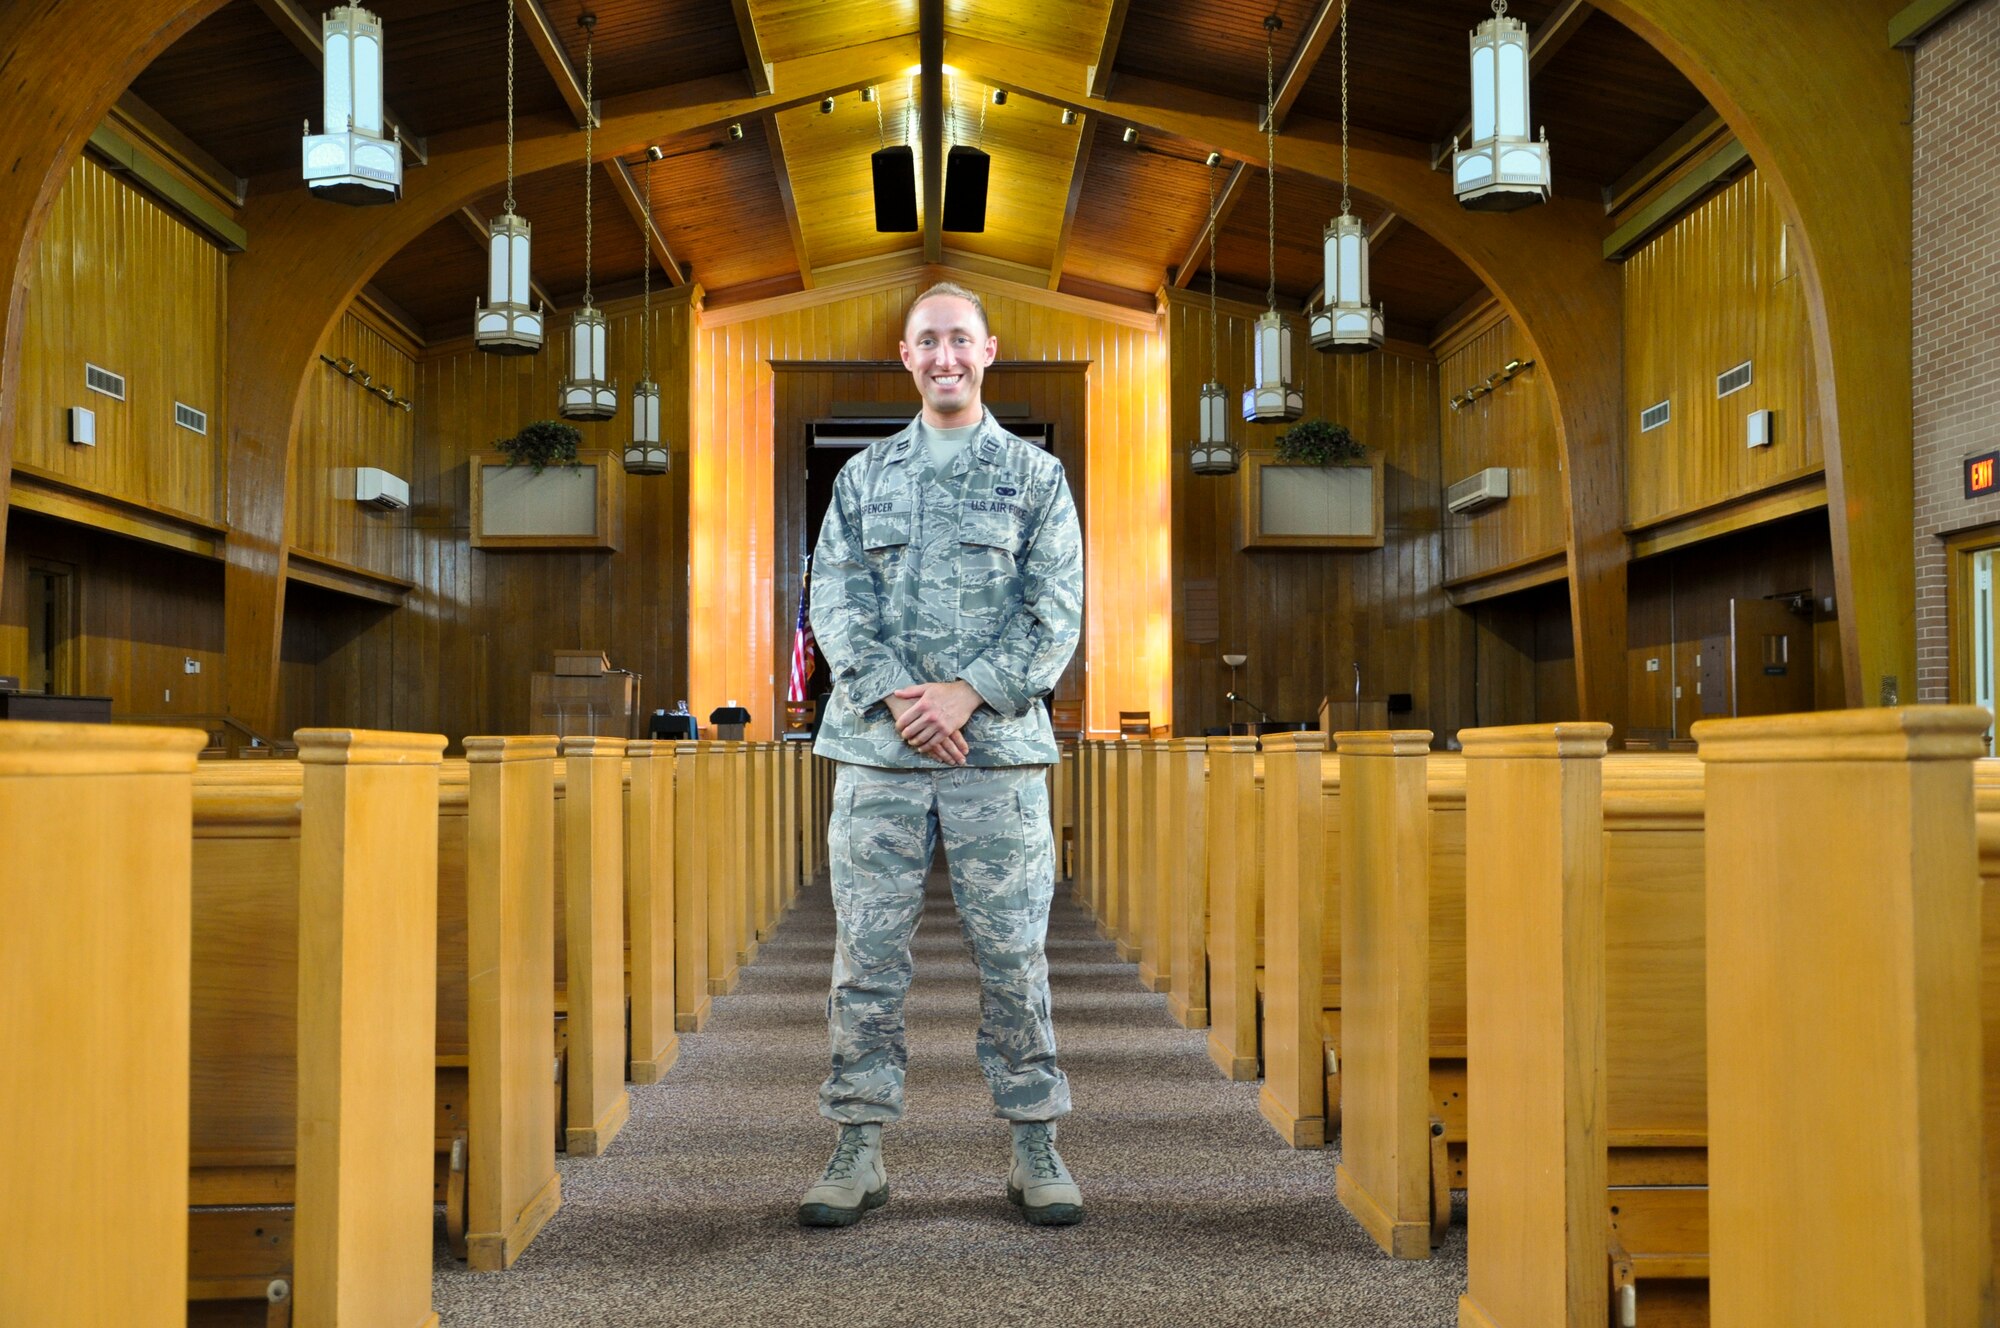 Captain Matthew Spencer, 325th Fighter Wing chaplain, stands between the pews in Chapel 2 at Tyndall Air Force Base July 3. 2014. Spencer was a prior enlisted member of security forces before he commissioned as an officer and became a chaplain in the Air Force Reserve. (U.S. Air Force photo by 2nd Lt. Christopher Bowyer-Meeder)